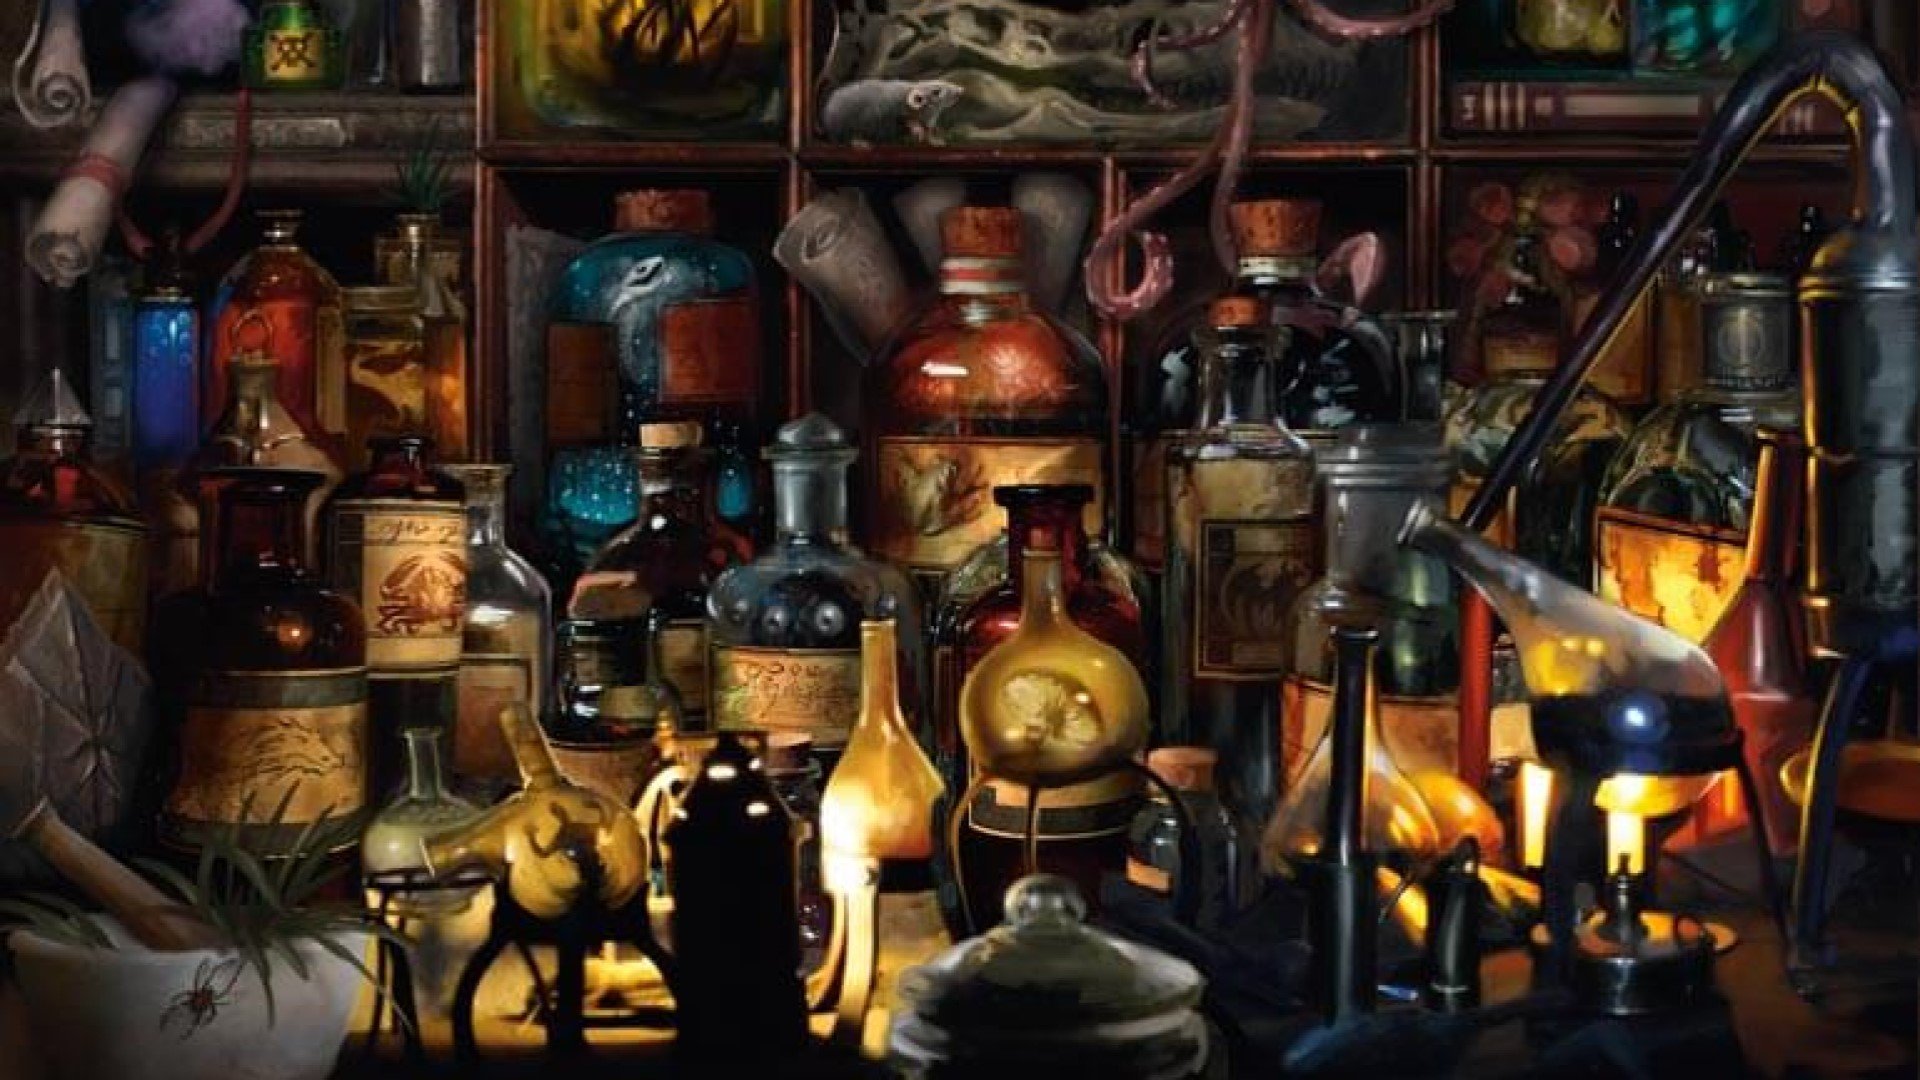 DnD Rogue 5e - Wizards of the Coast artwork showing a collection of potions, poisons, bottles and magical equipment